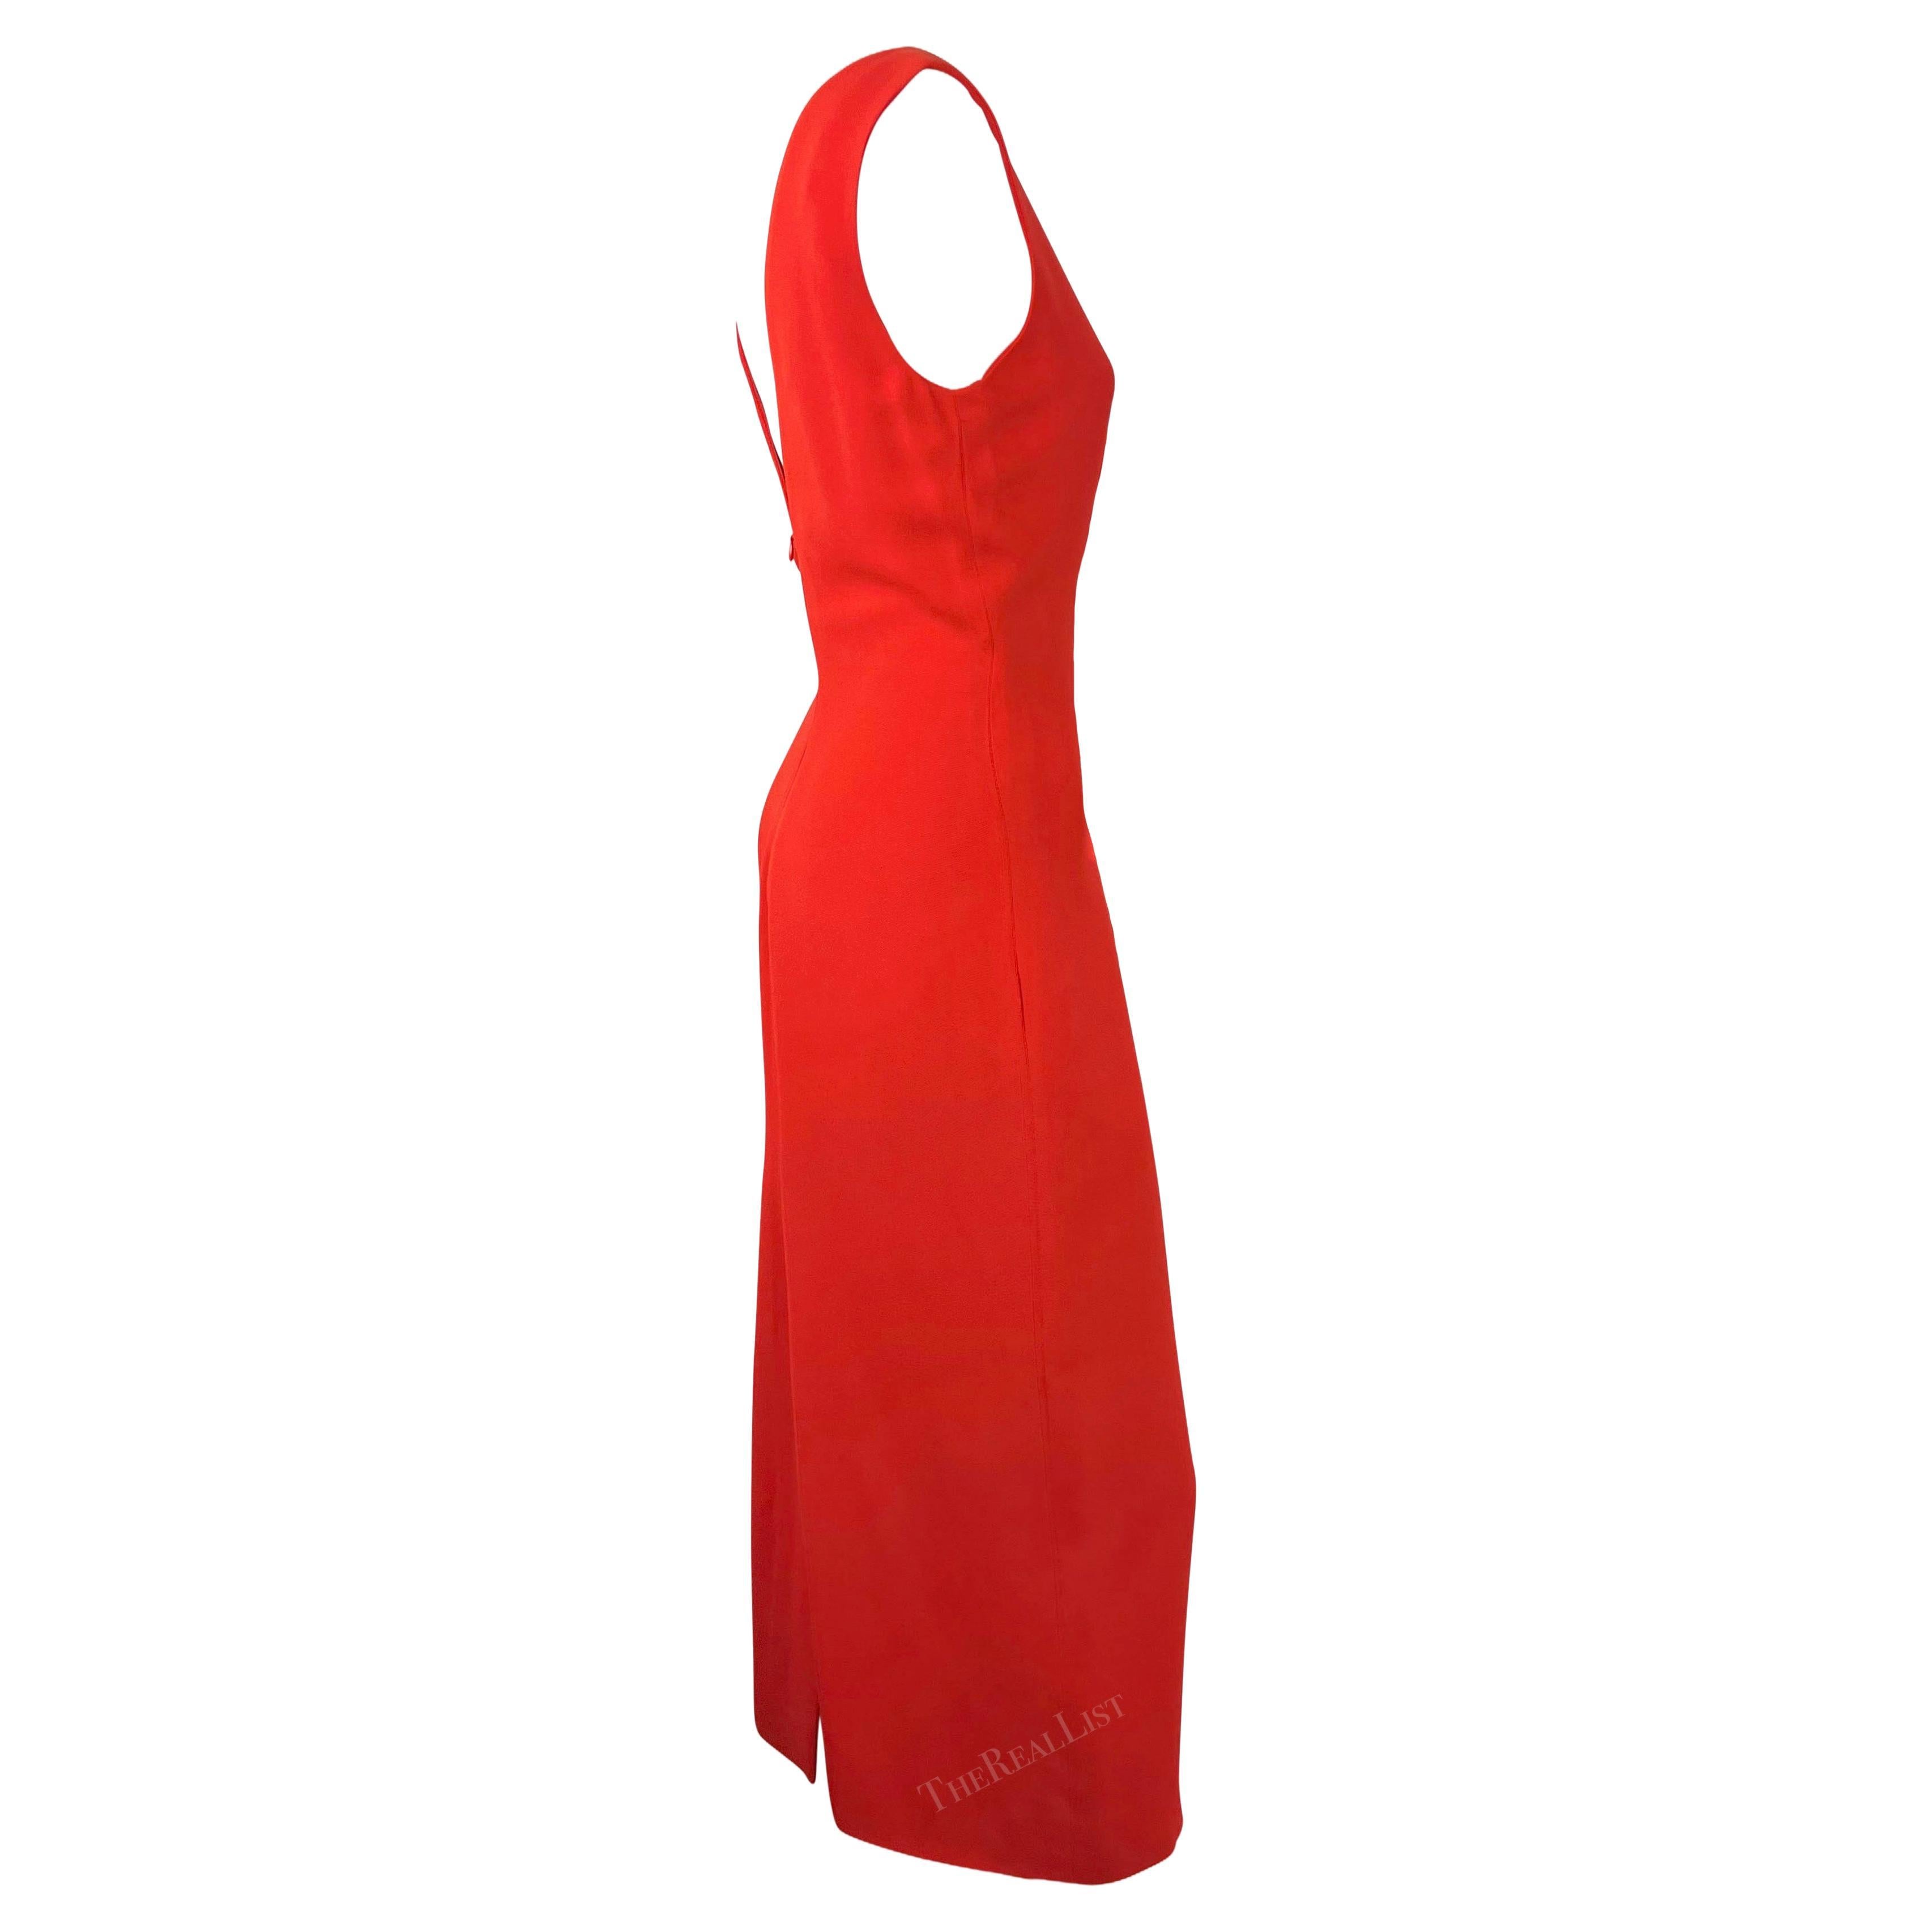 S/S 1993 Gianni Versace Runway Ad Red Plunging Back Sleeveless Dress For Sale 5